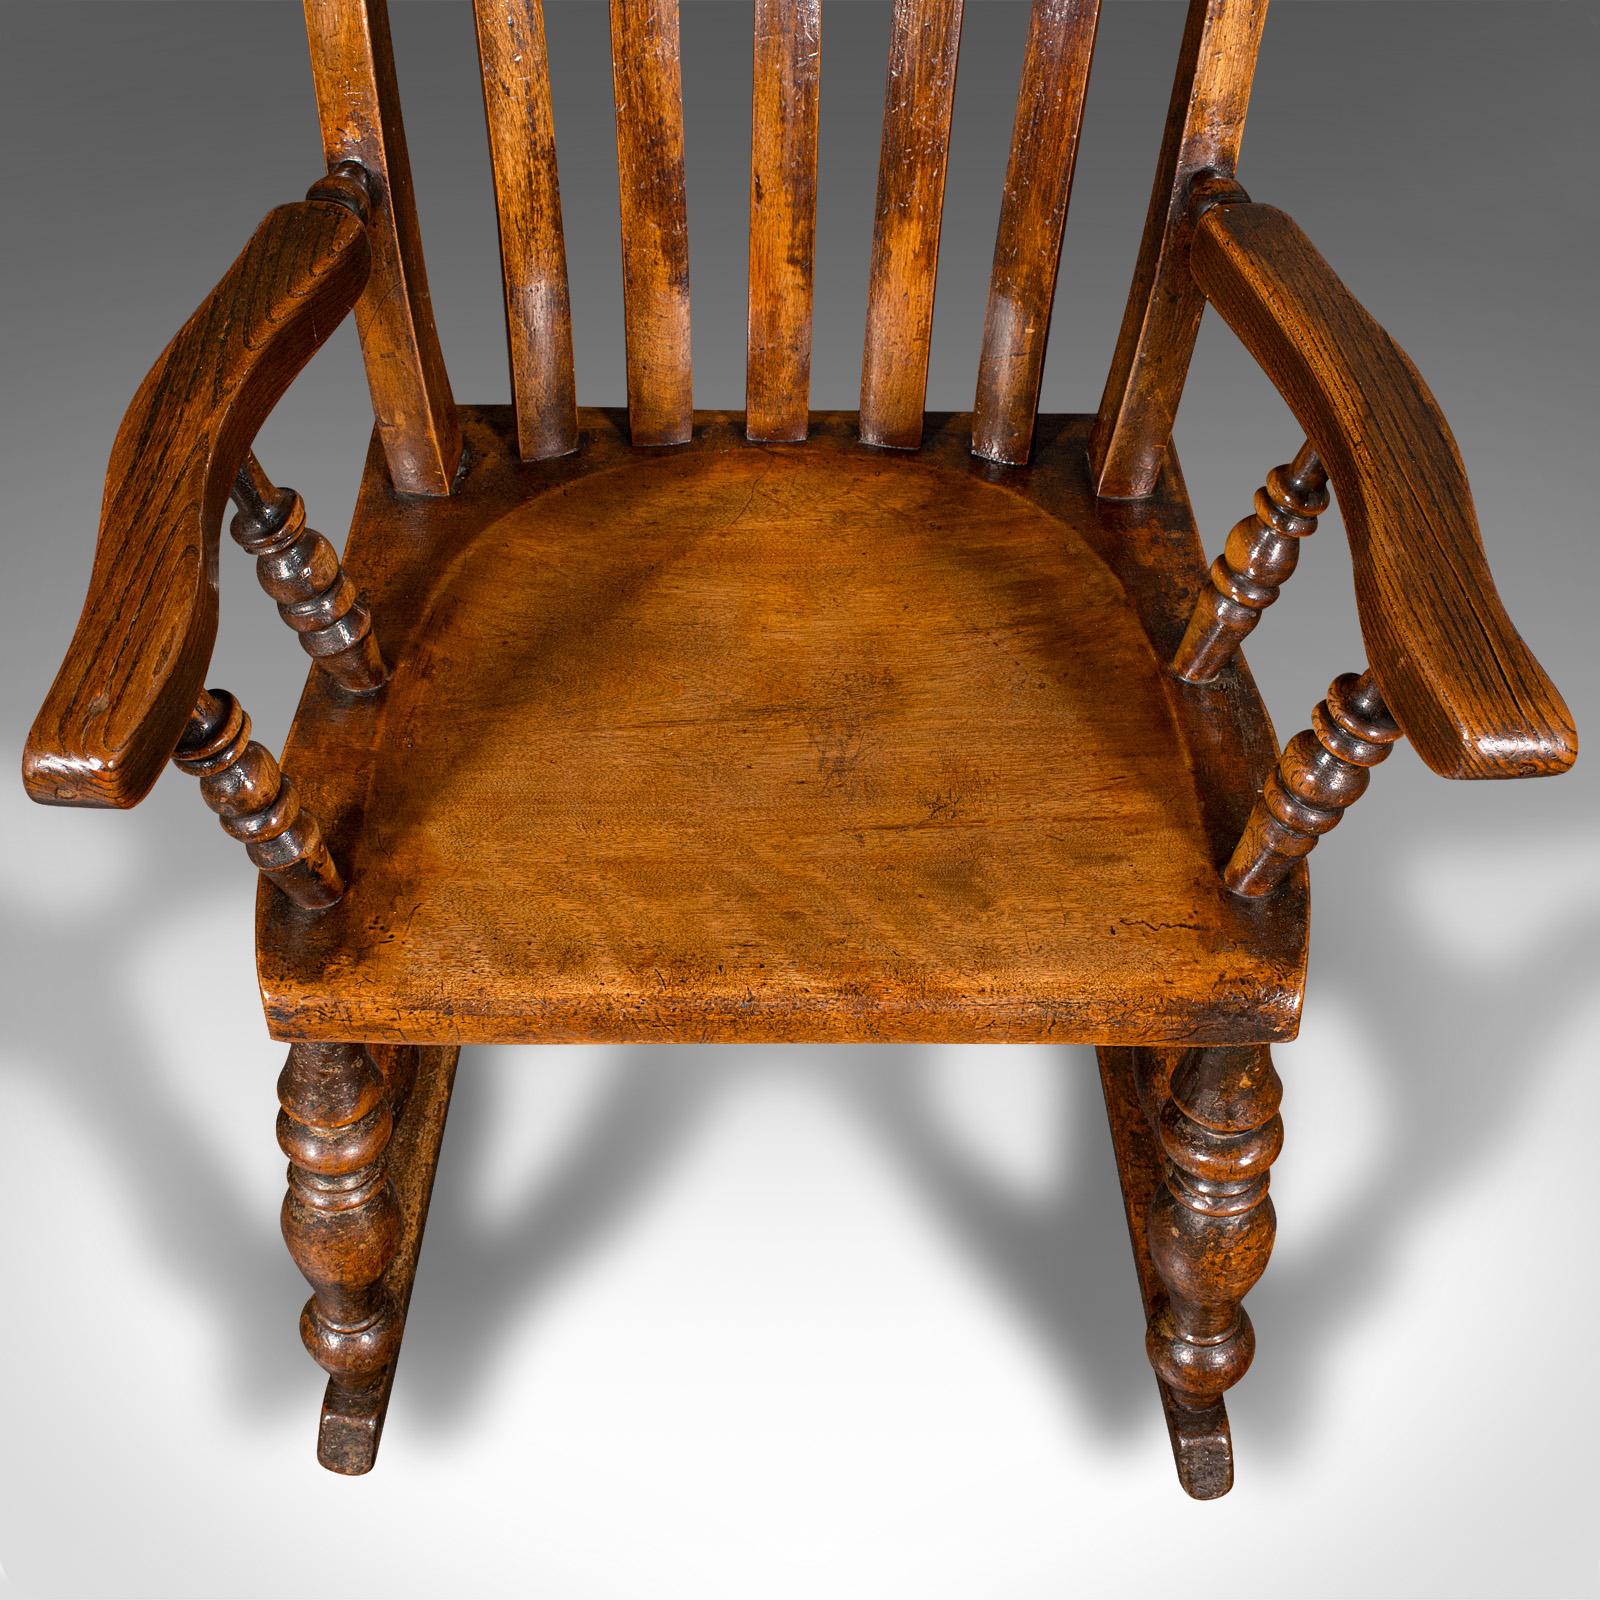 Antique Lath Back Rocking Chair, English Elm, Beech, Elbow Seat, Victorian, 1880 For Sale 5